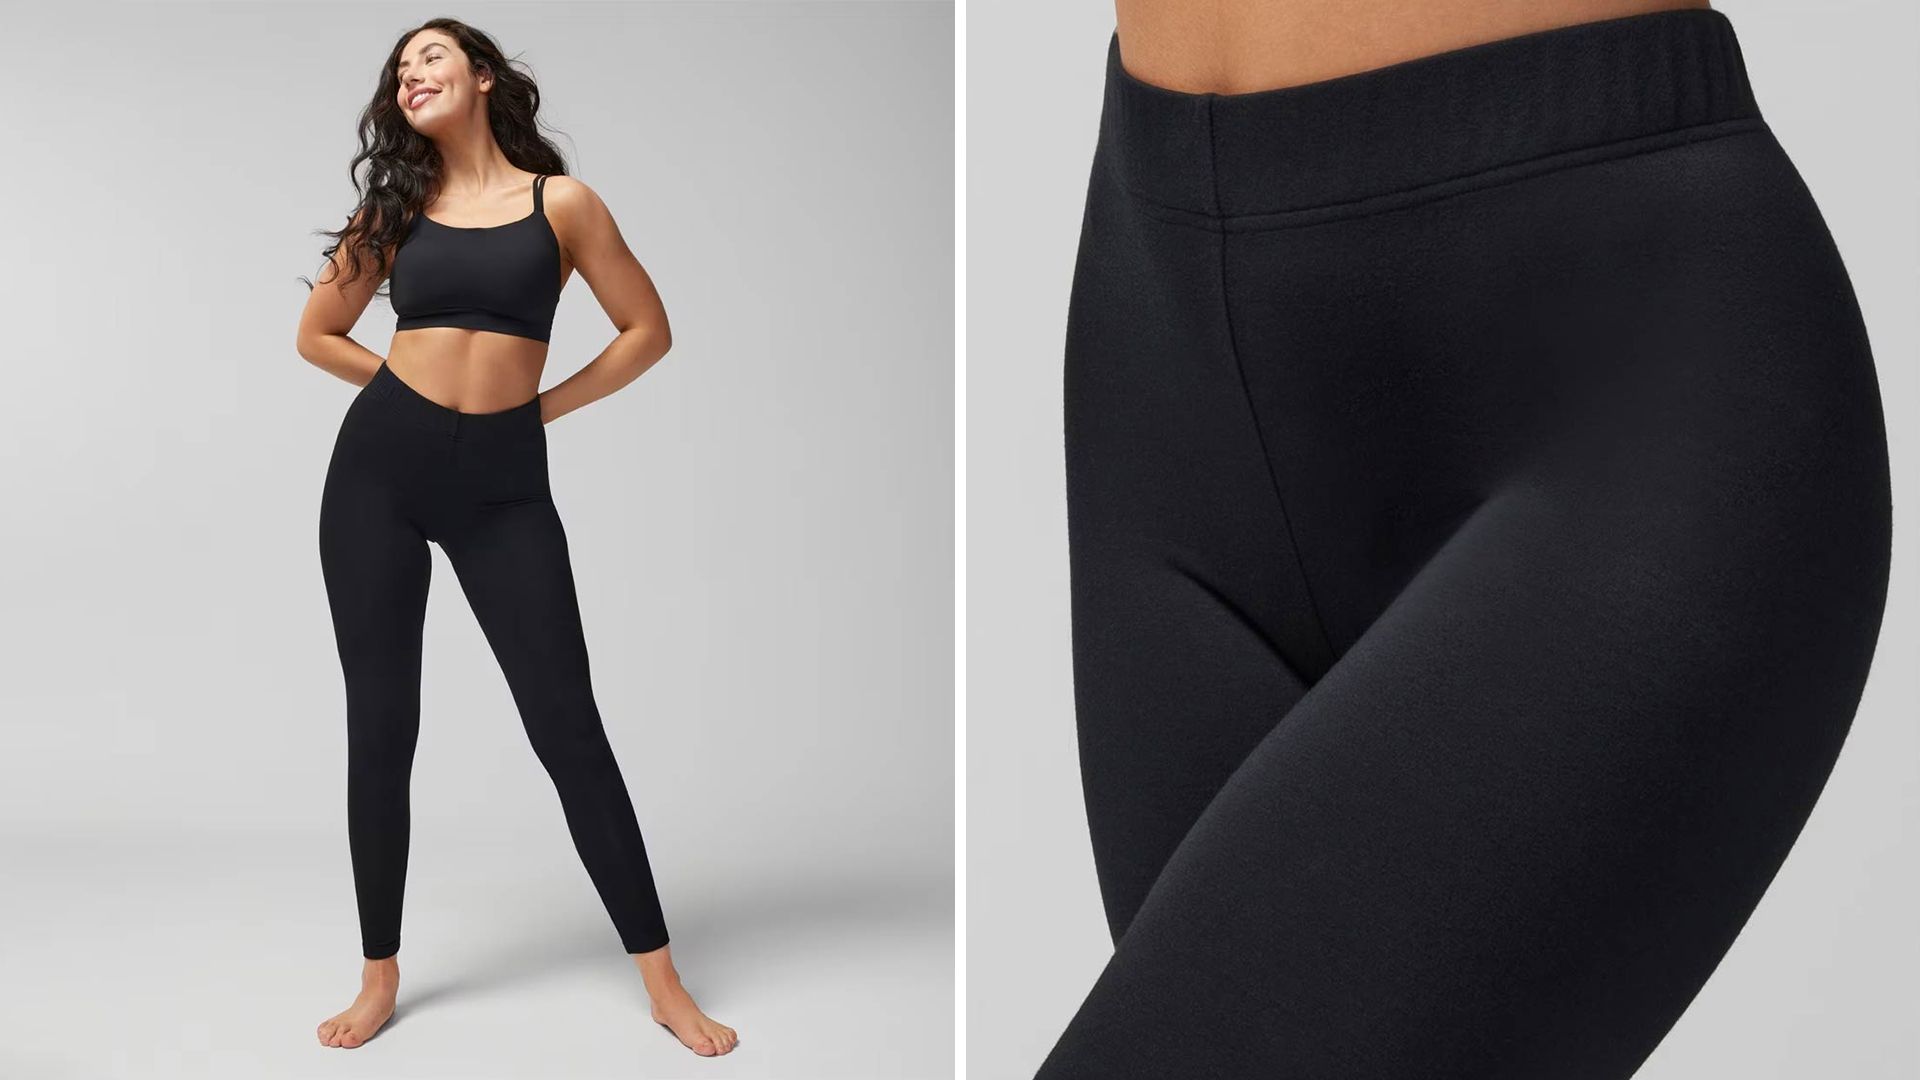 (Left) Soma<sup class=st-superscript>®</sup> women’s model wearing a blank sports bra and black leggings. (Right) A close-up shot of black leggings.